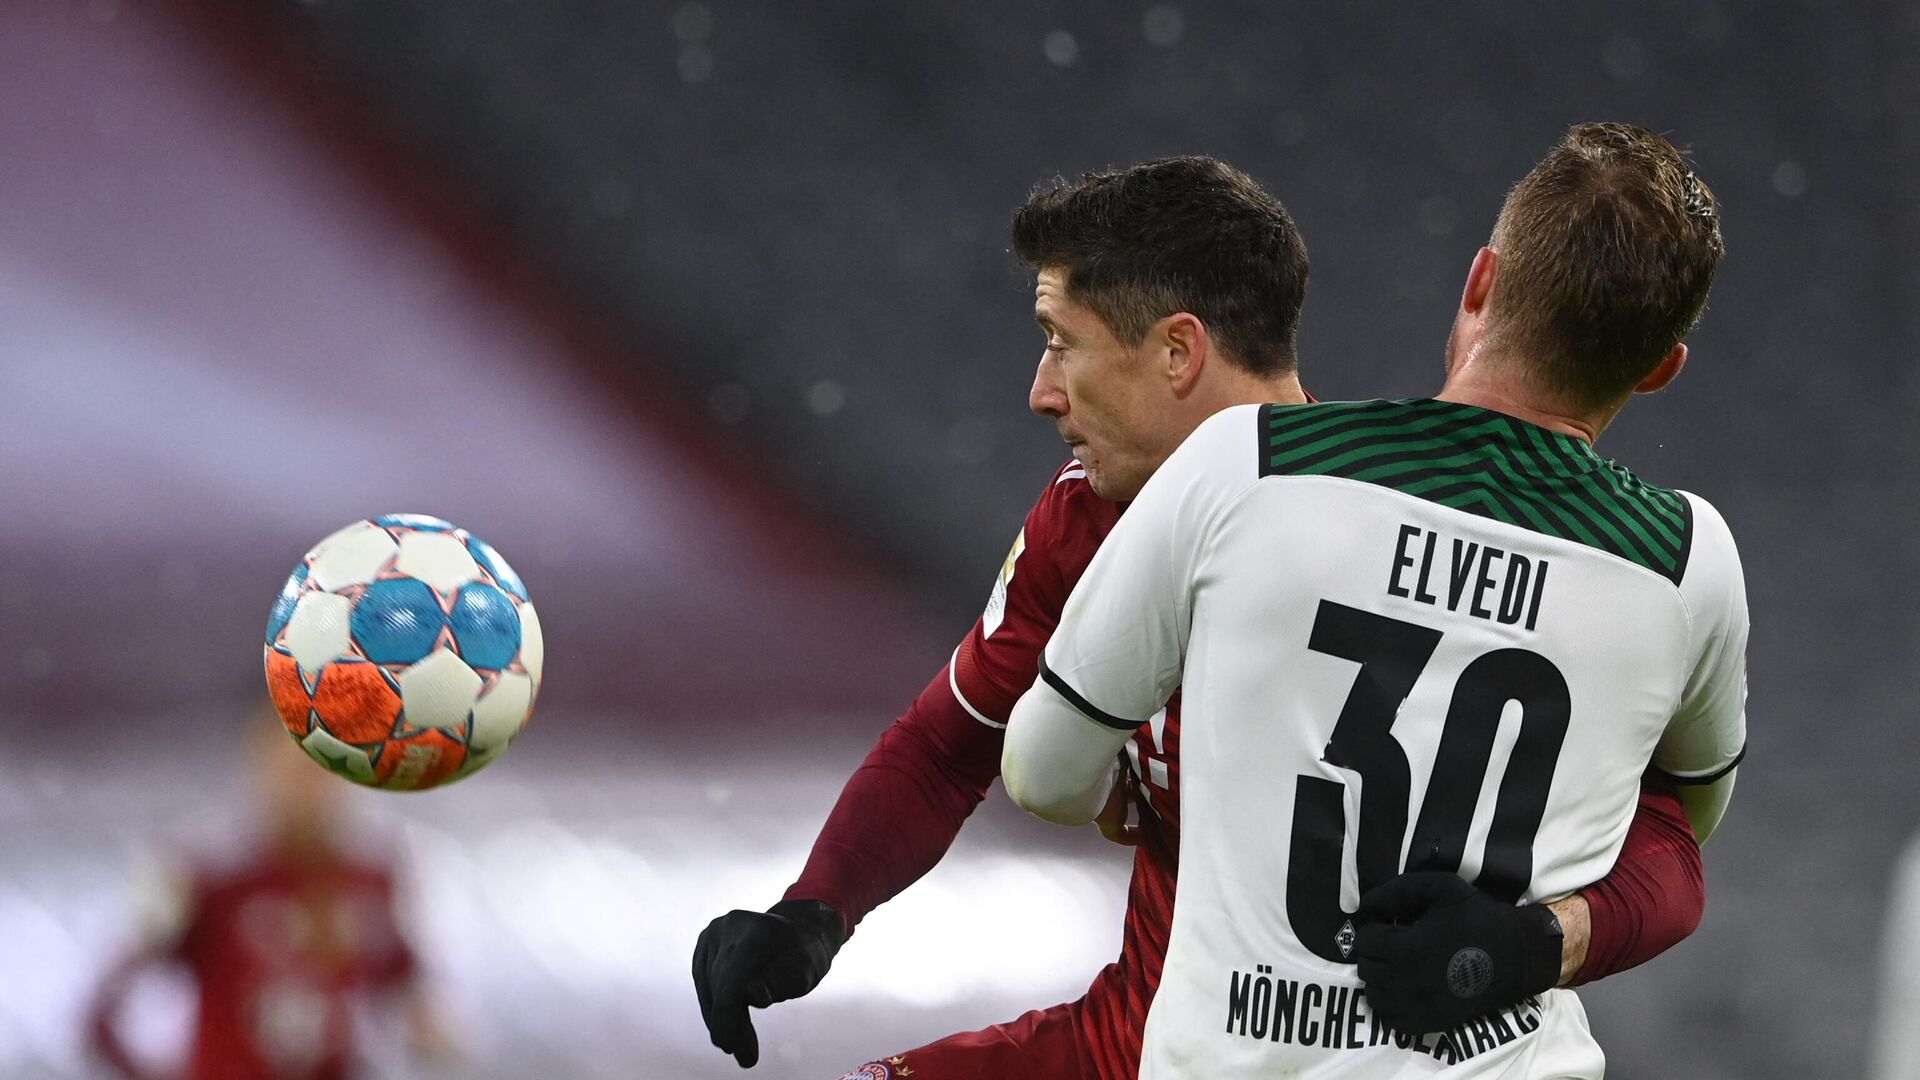 Bayern Munich's Polish forward Robert Lewandowski (Back) and Moenchengladbach's Swiss defender Nico Elvedi vie for the ball during the German first division Bundesliga football match FC Bayern Munich v Borussia Moenchengladbach in Munich, southern Germany on January 7, 2022. (Photo by CHRISTOF STACHE / AFP) / DFL REGULATIONS PROHIBIT ANY USE OF PHOTOGRAPHS AS IMAGE SEQUENCES AND/OR QUASI-VIDEO - РИА Новости, 1920, 08.01.2022